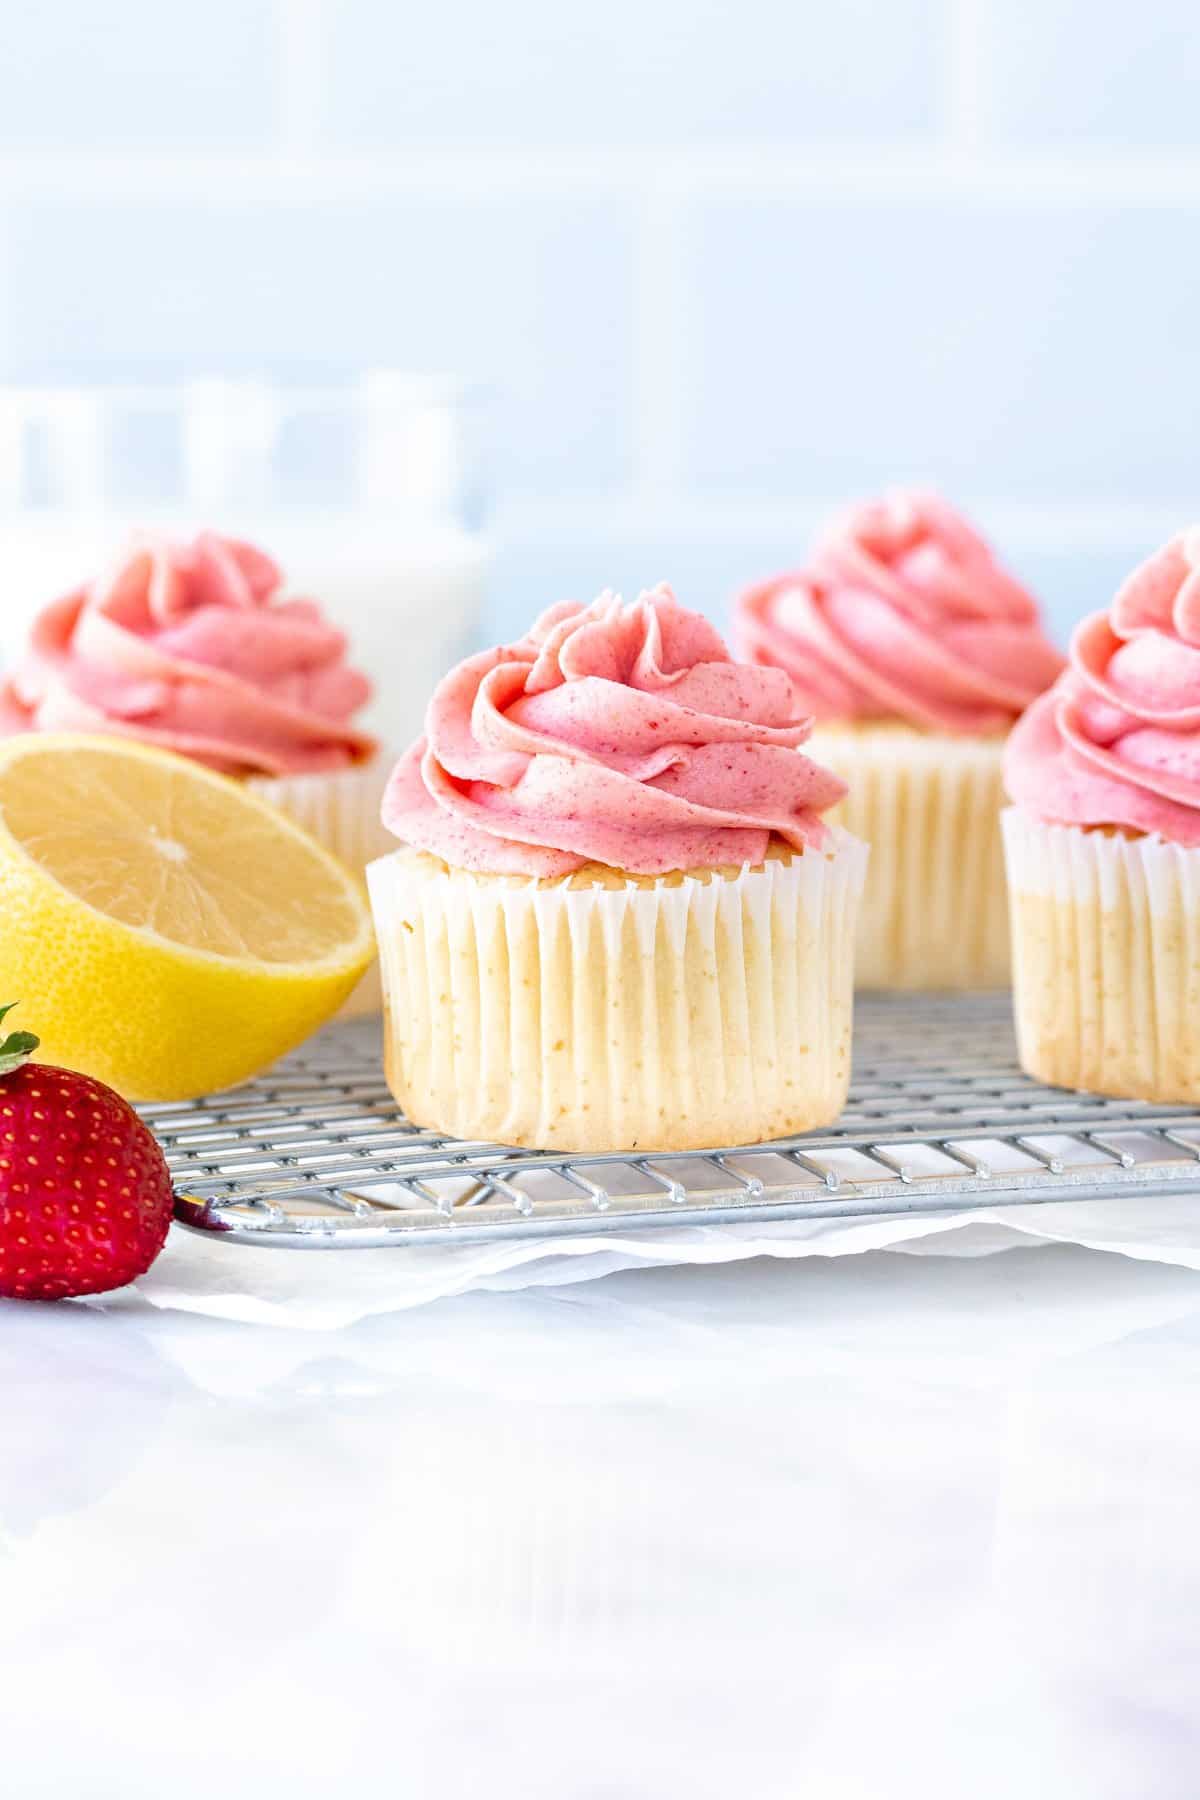 Strawberry lemonade cupcakes on a wire rack